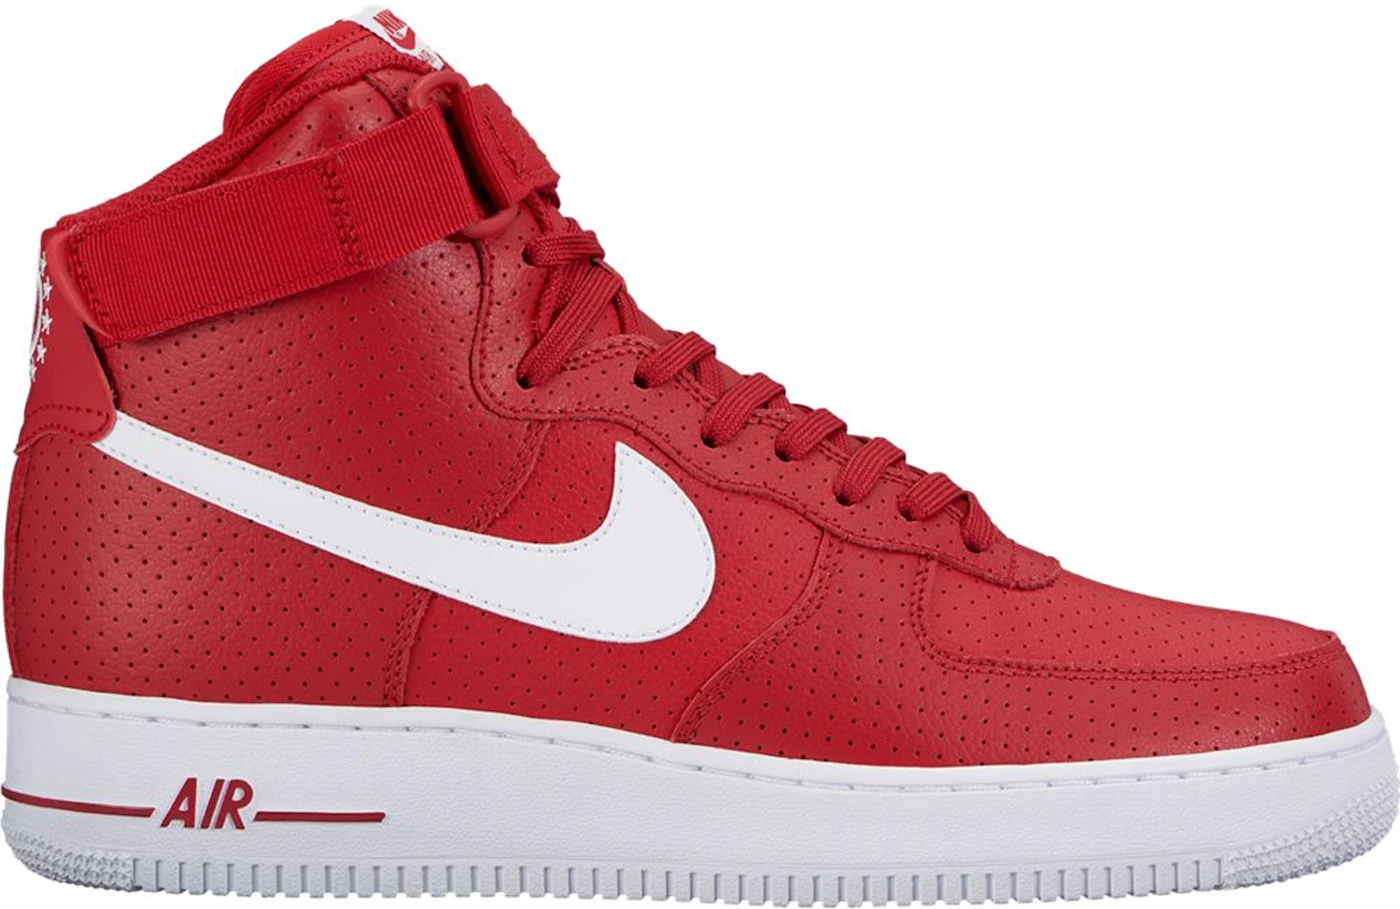 Nike Air Force 1 Gym Red Men's - 315121-606 - US